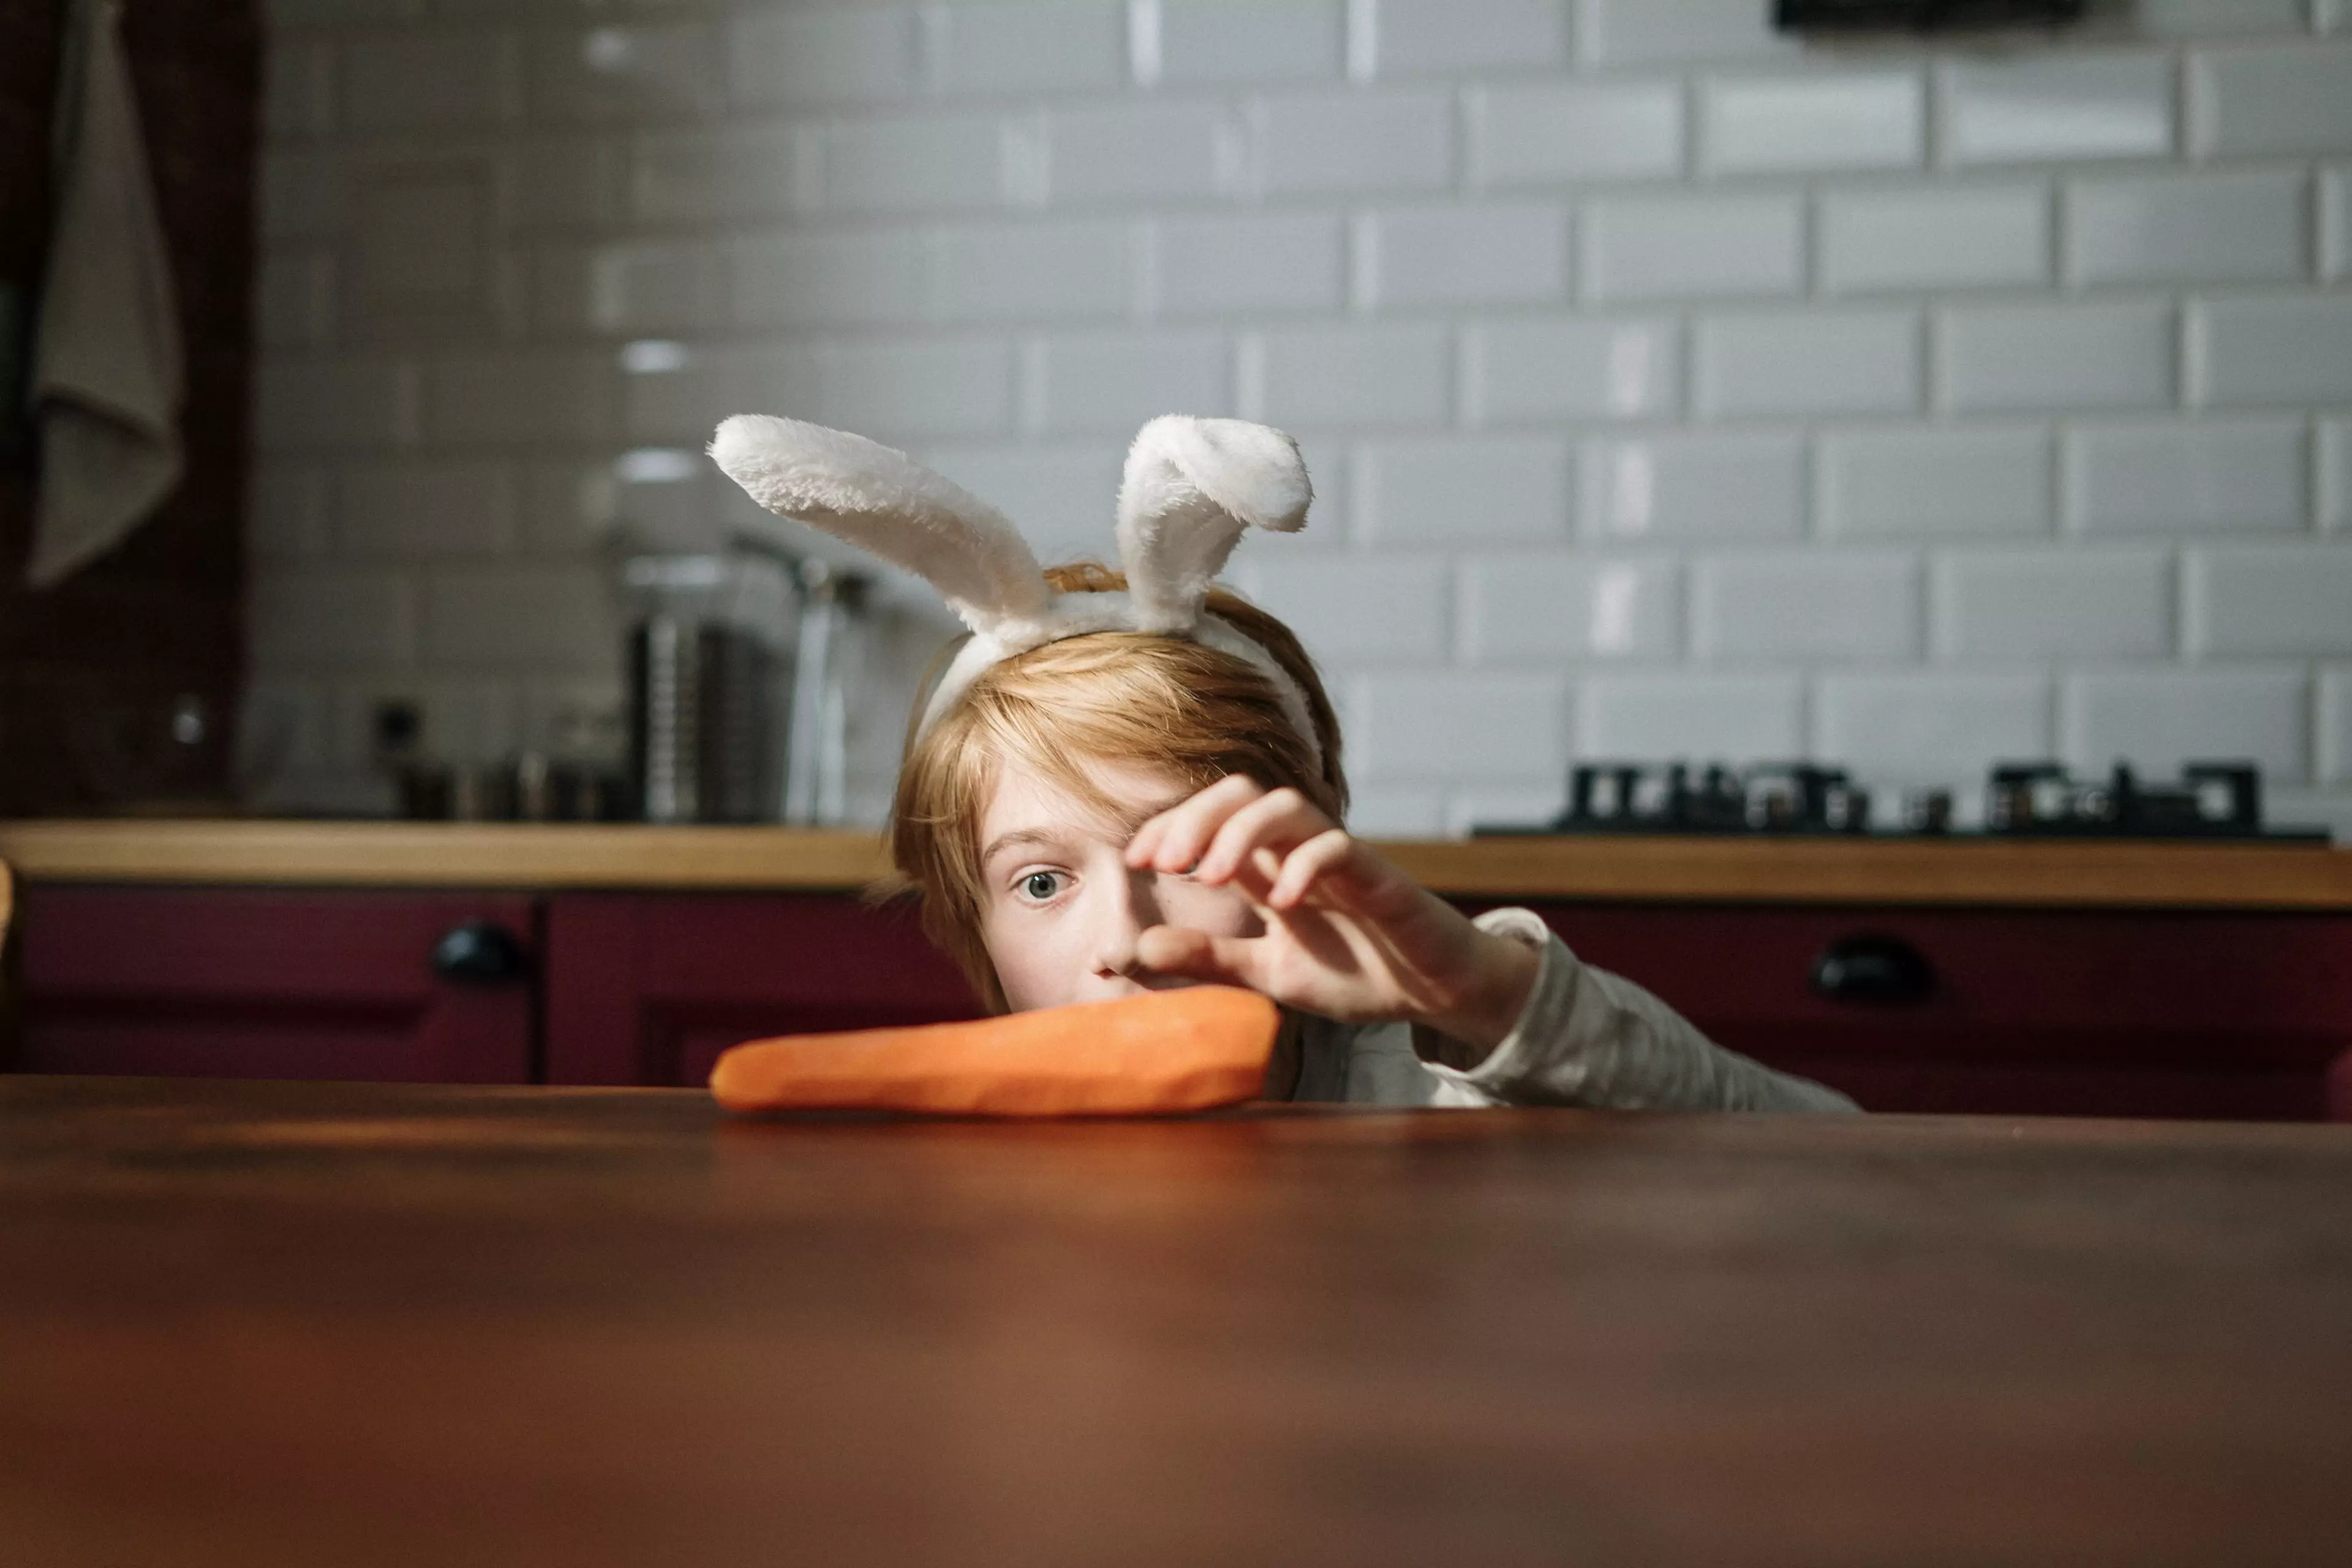 Telling Kids Carrots Can Help Them See In The Dark 'Damages Them Later In Life'